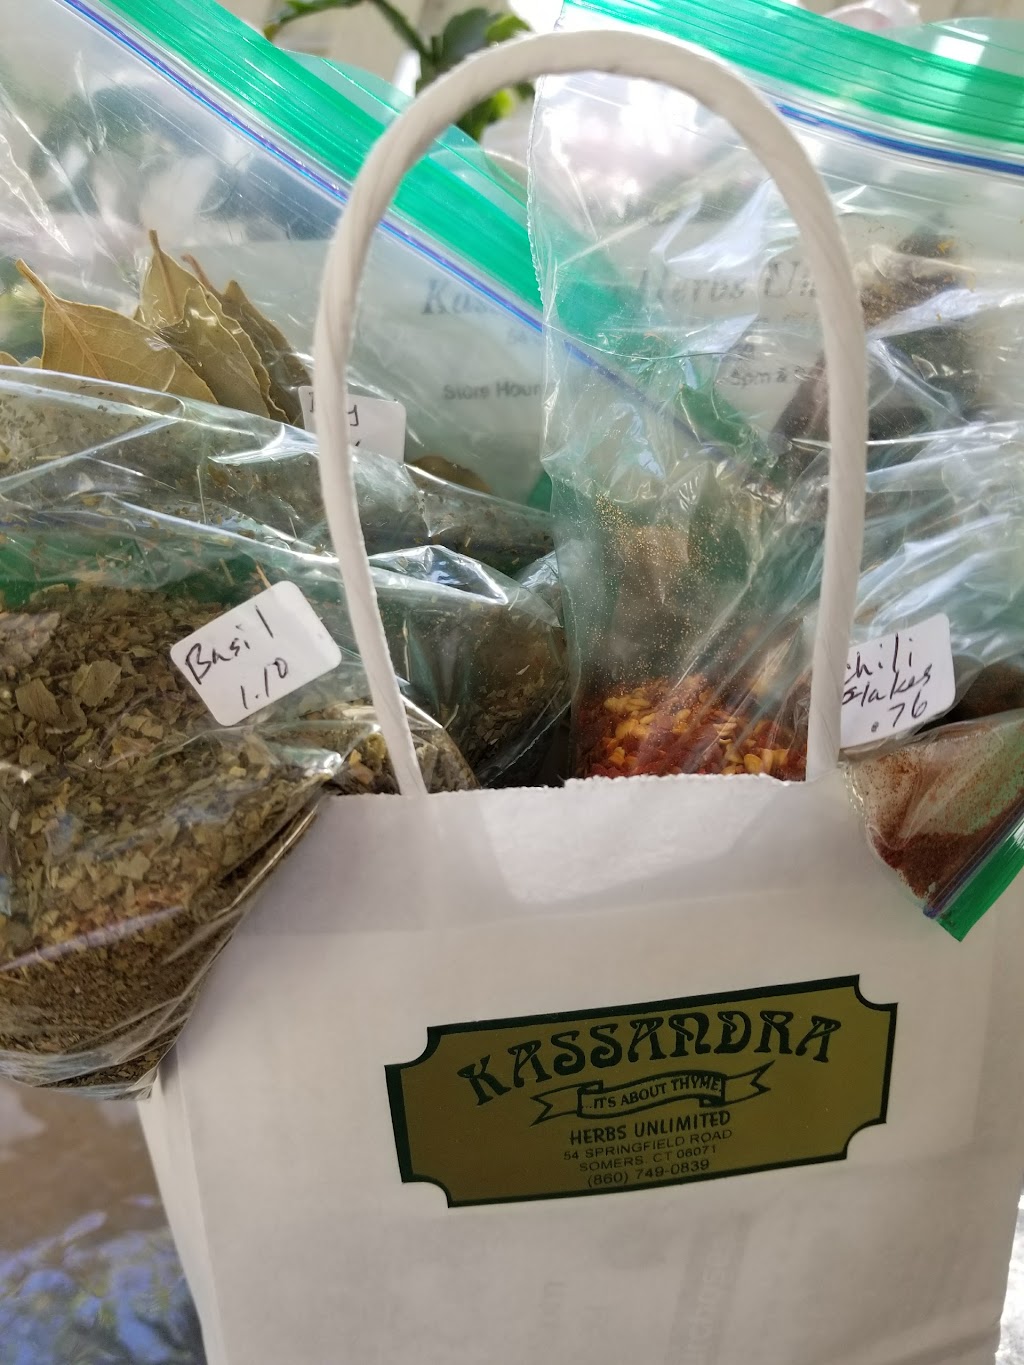 Kassandra Herbs Unlimited | 54 Springfield Rd, Somers, CT 06071 | Phone: (860) 749-0839